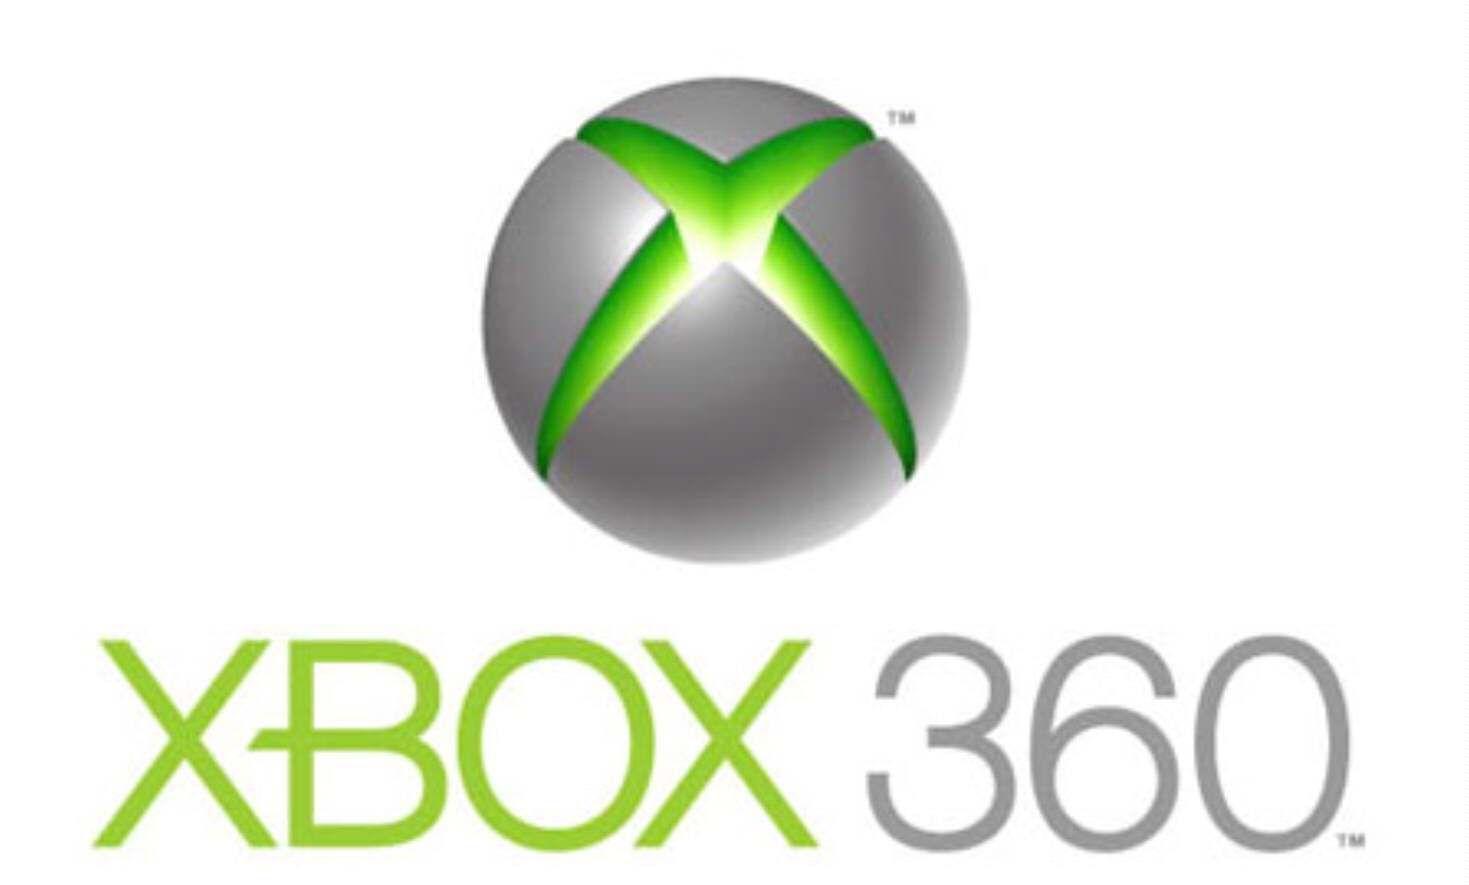 First Xbox Logo - The xbox 360 logo was an improvement upon the old xbox logo for a ...